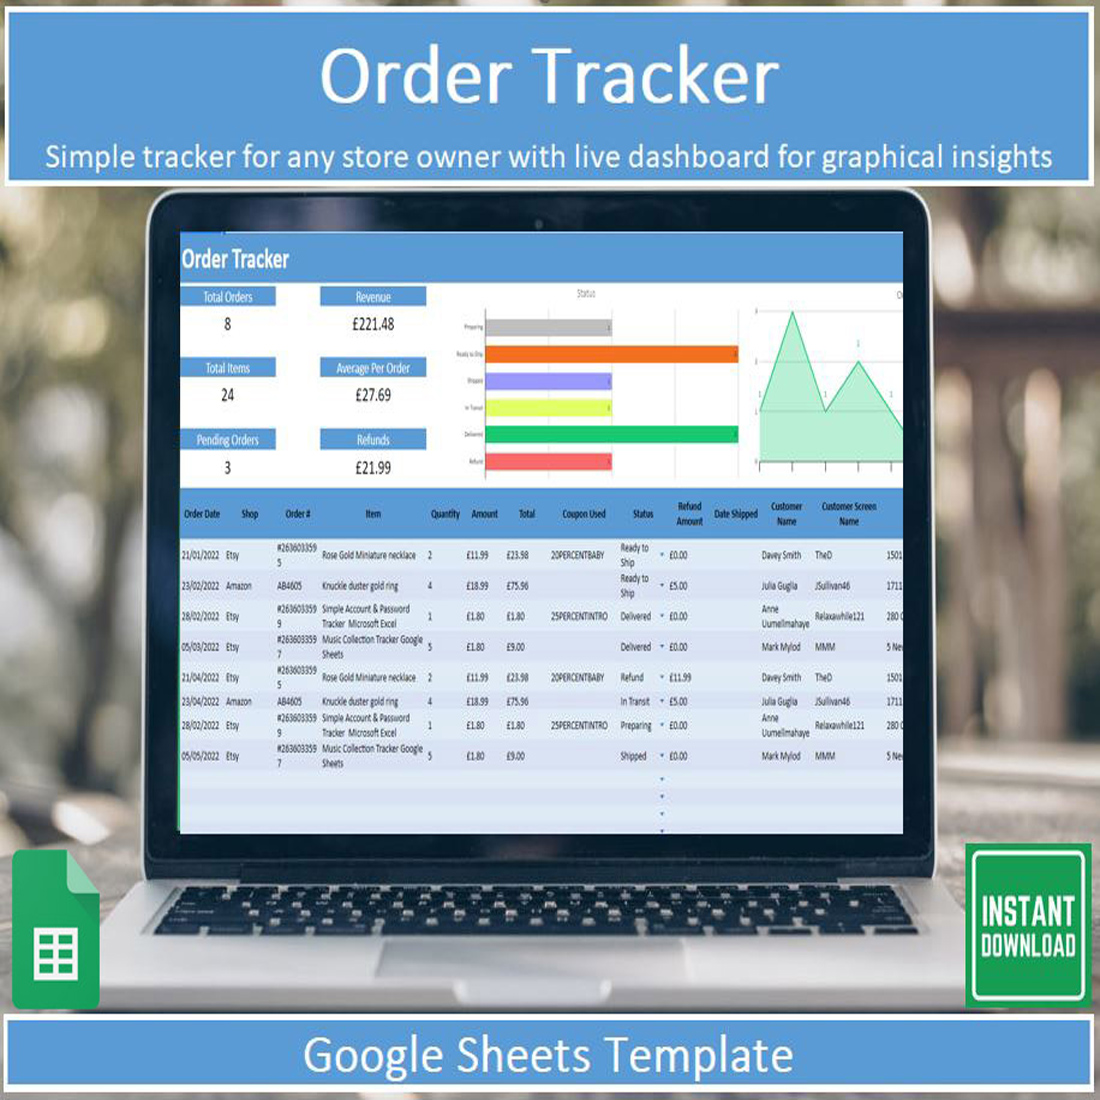 Order Tracker Template cover image.